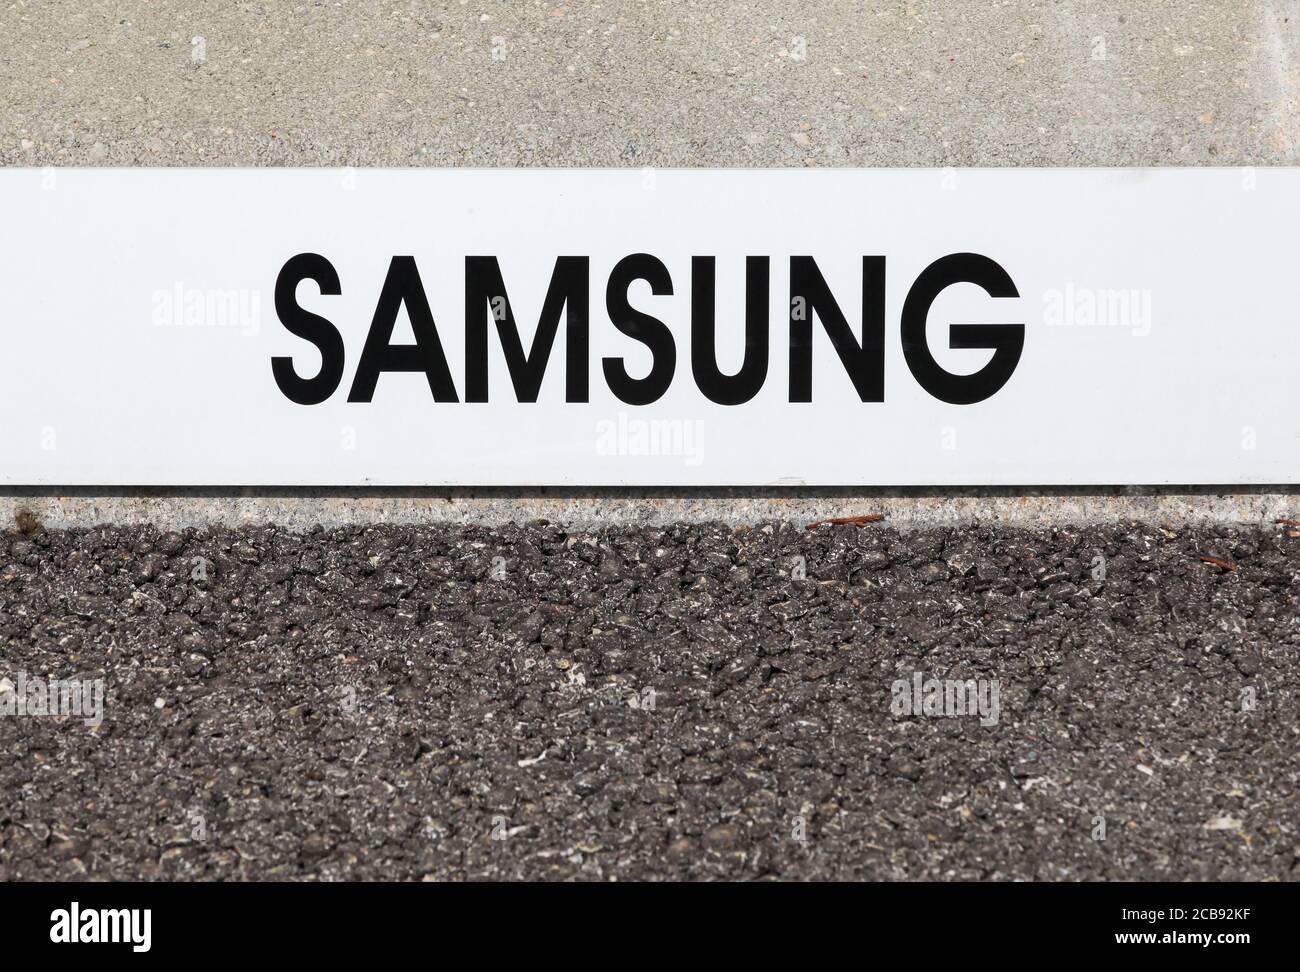 Saint Priest, France - May 16, 2020: Samsung sign on a signboard. Samsung is a South Korean multinational conglomerate company Stock Photo